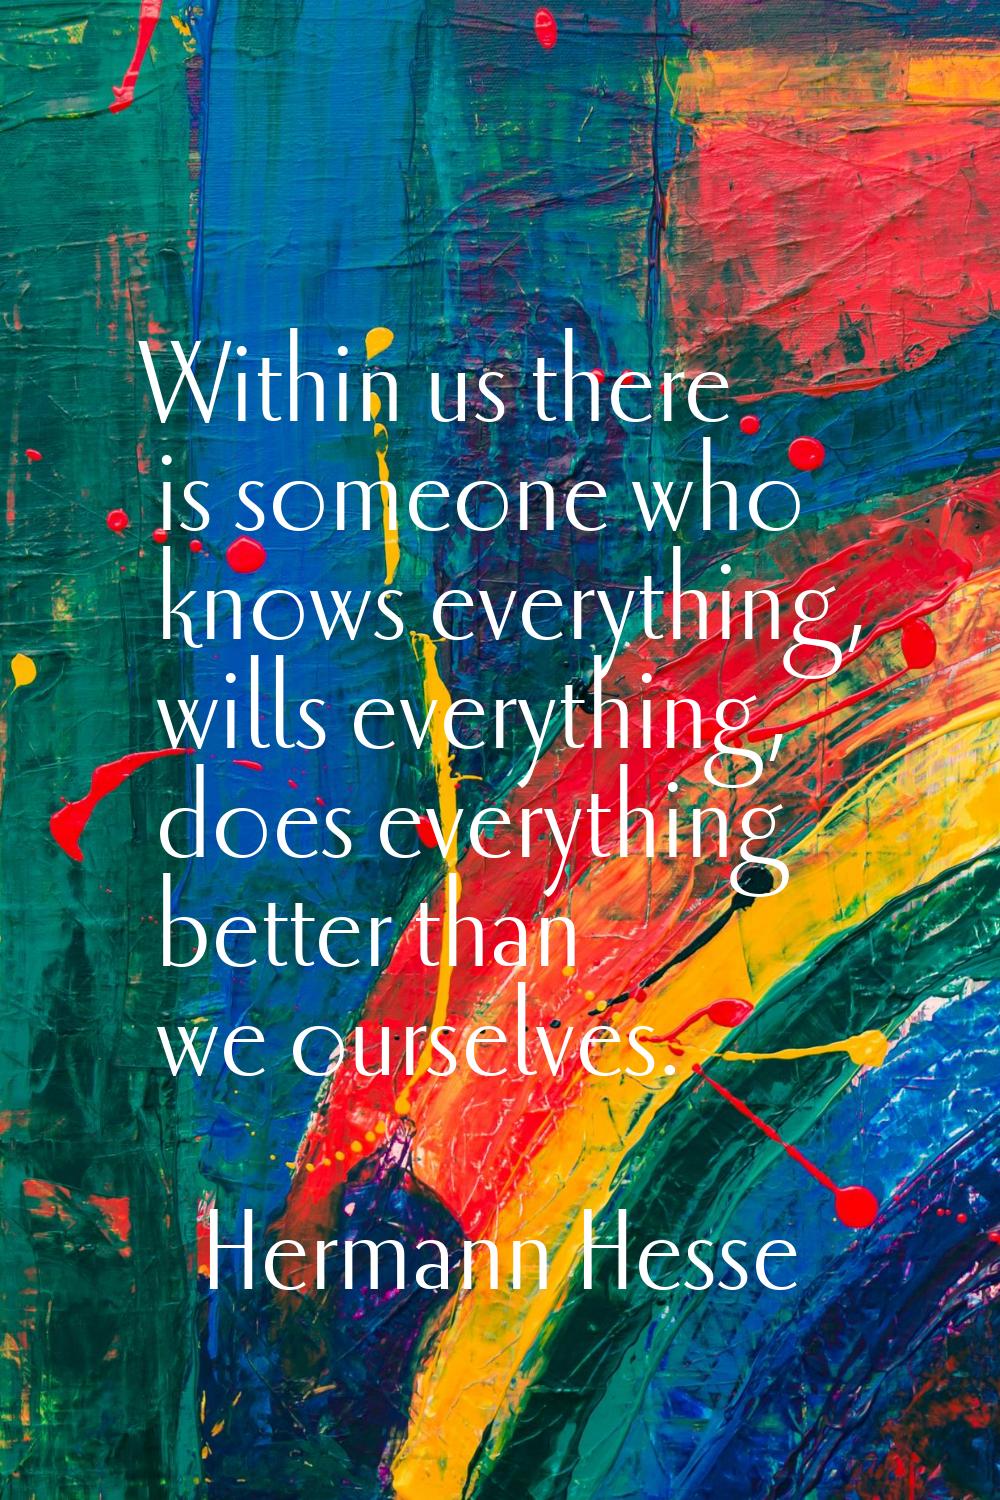 Within us there is someone who knows everything, wills everything, does everything better than we o